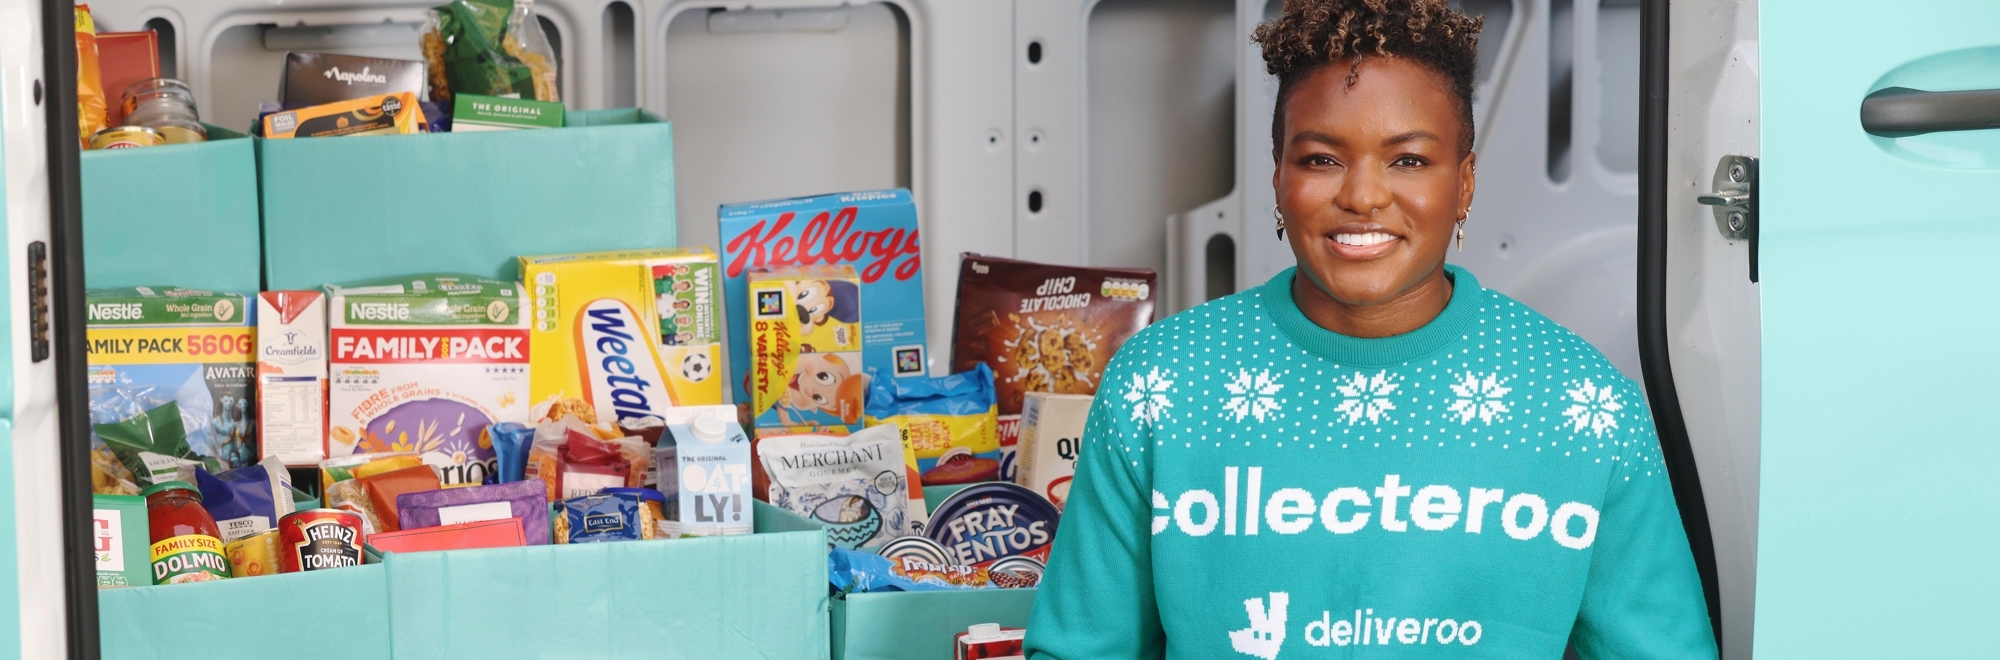 Deliveroo becomes 'Collecteroo' to help households facing hunger this Christmas